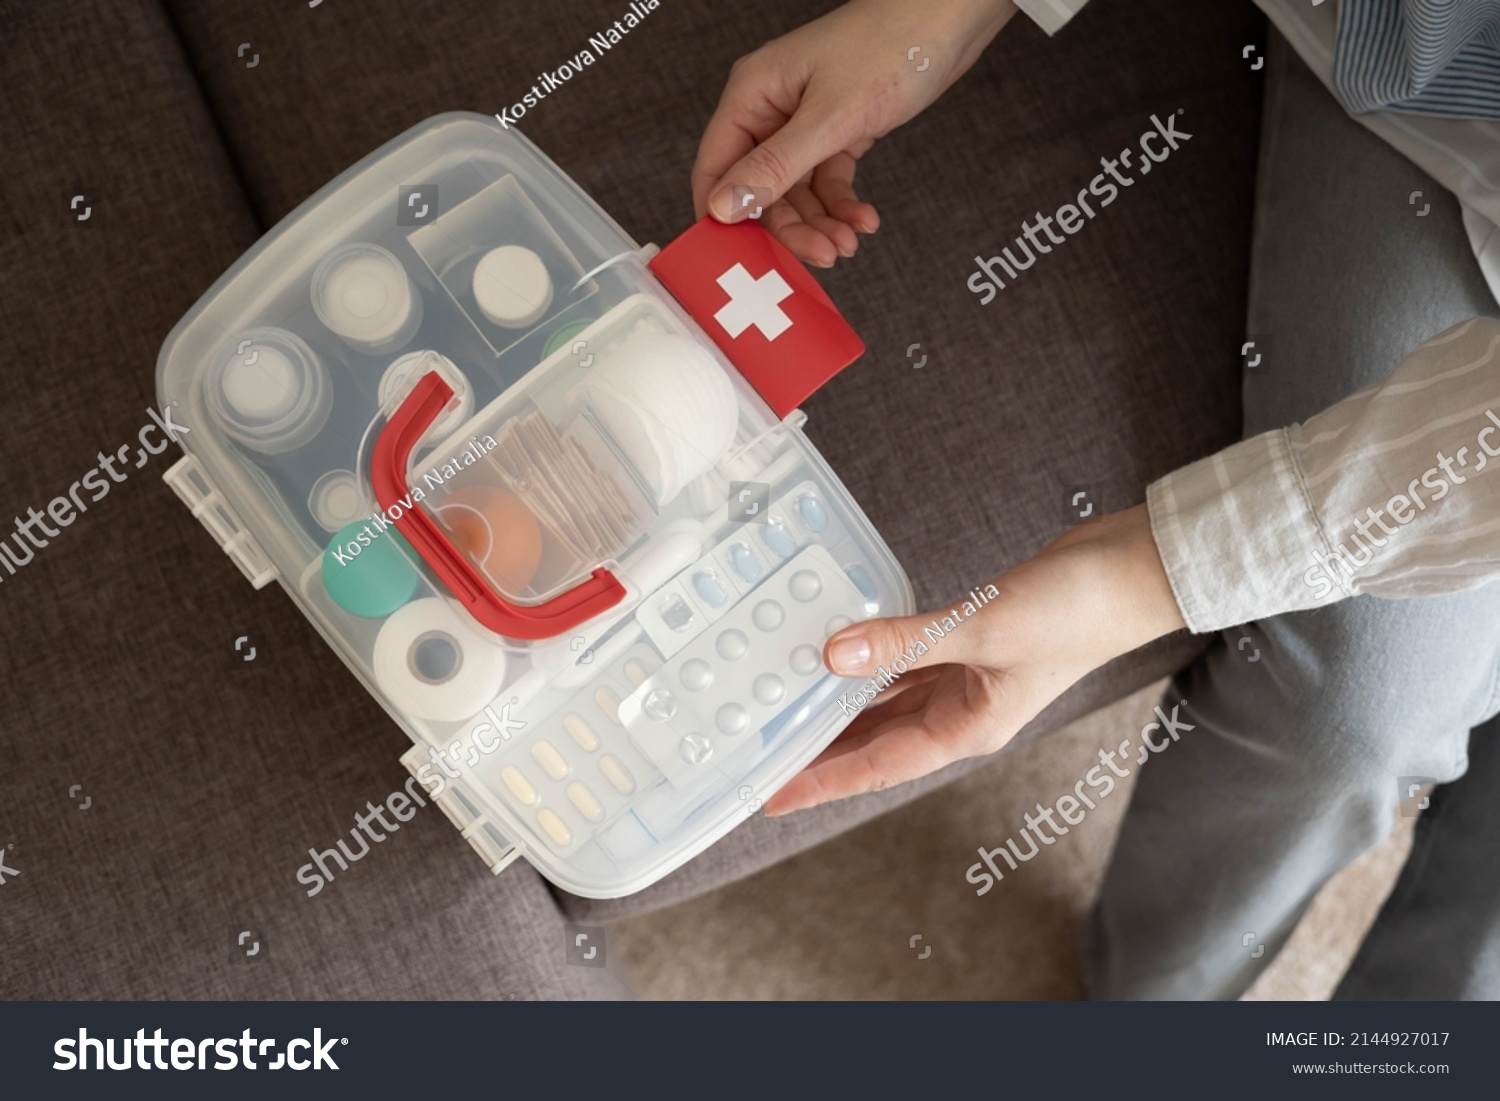 Closeup female hand neatly placing medicament at domestic first aid kit top view. Storage organization in transparent plastic box drug, pill, syringe, bandage. Fast health help safety emergency supply #2144927017